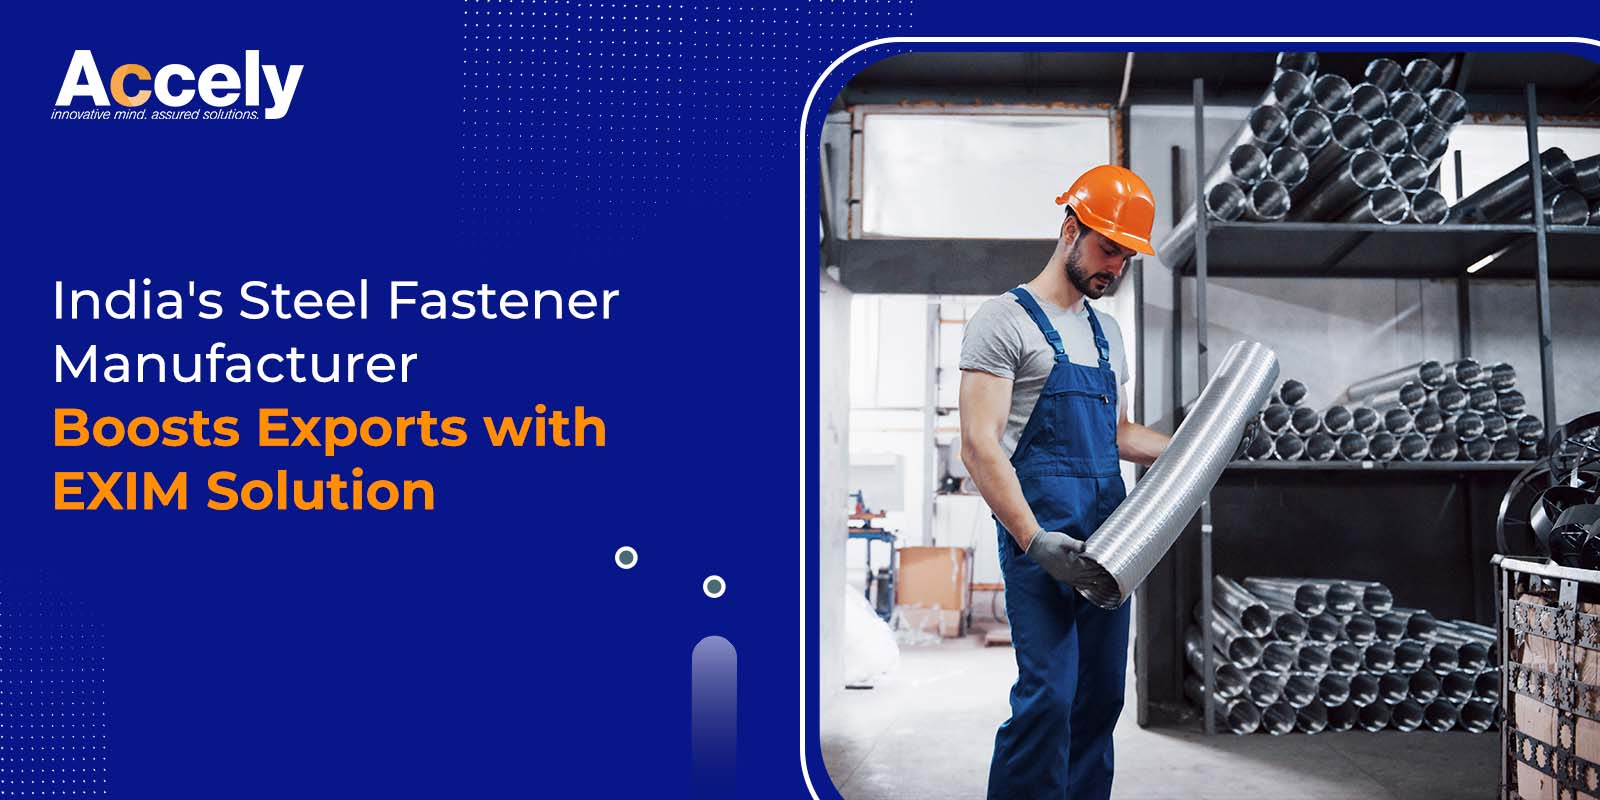 India's Steel Fastener Manufacturer Boosts Exports with EXIM Solution